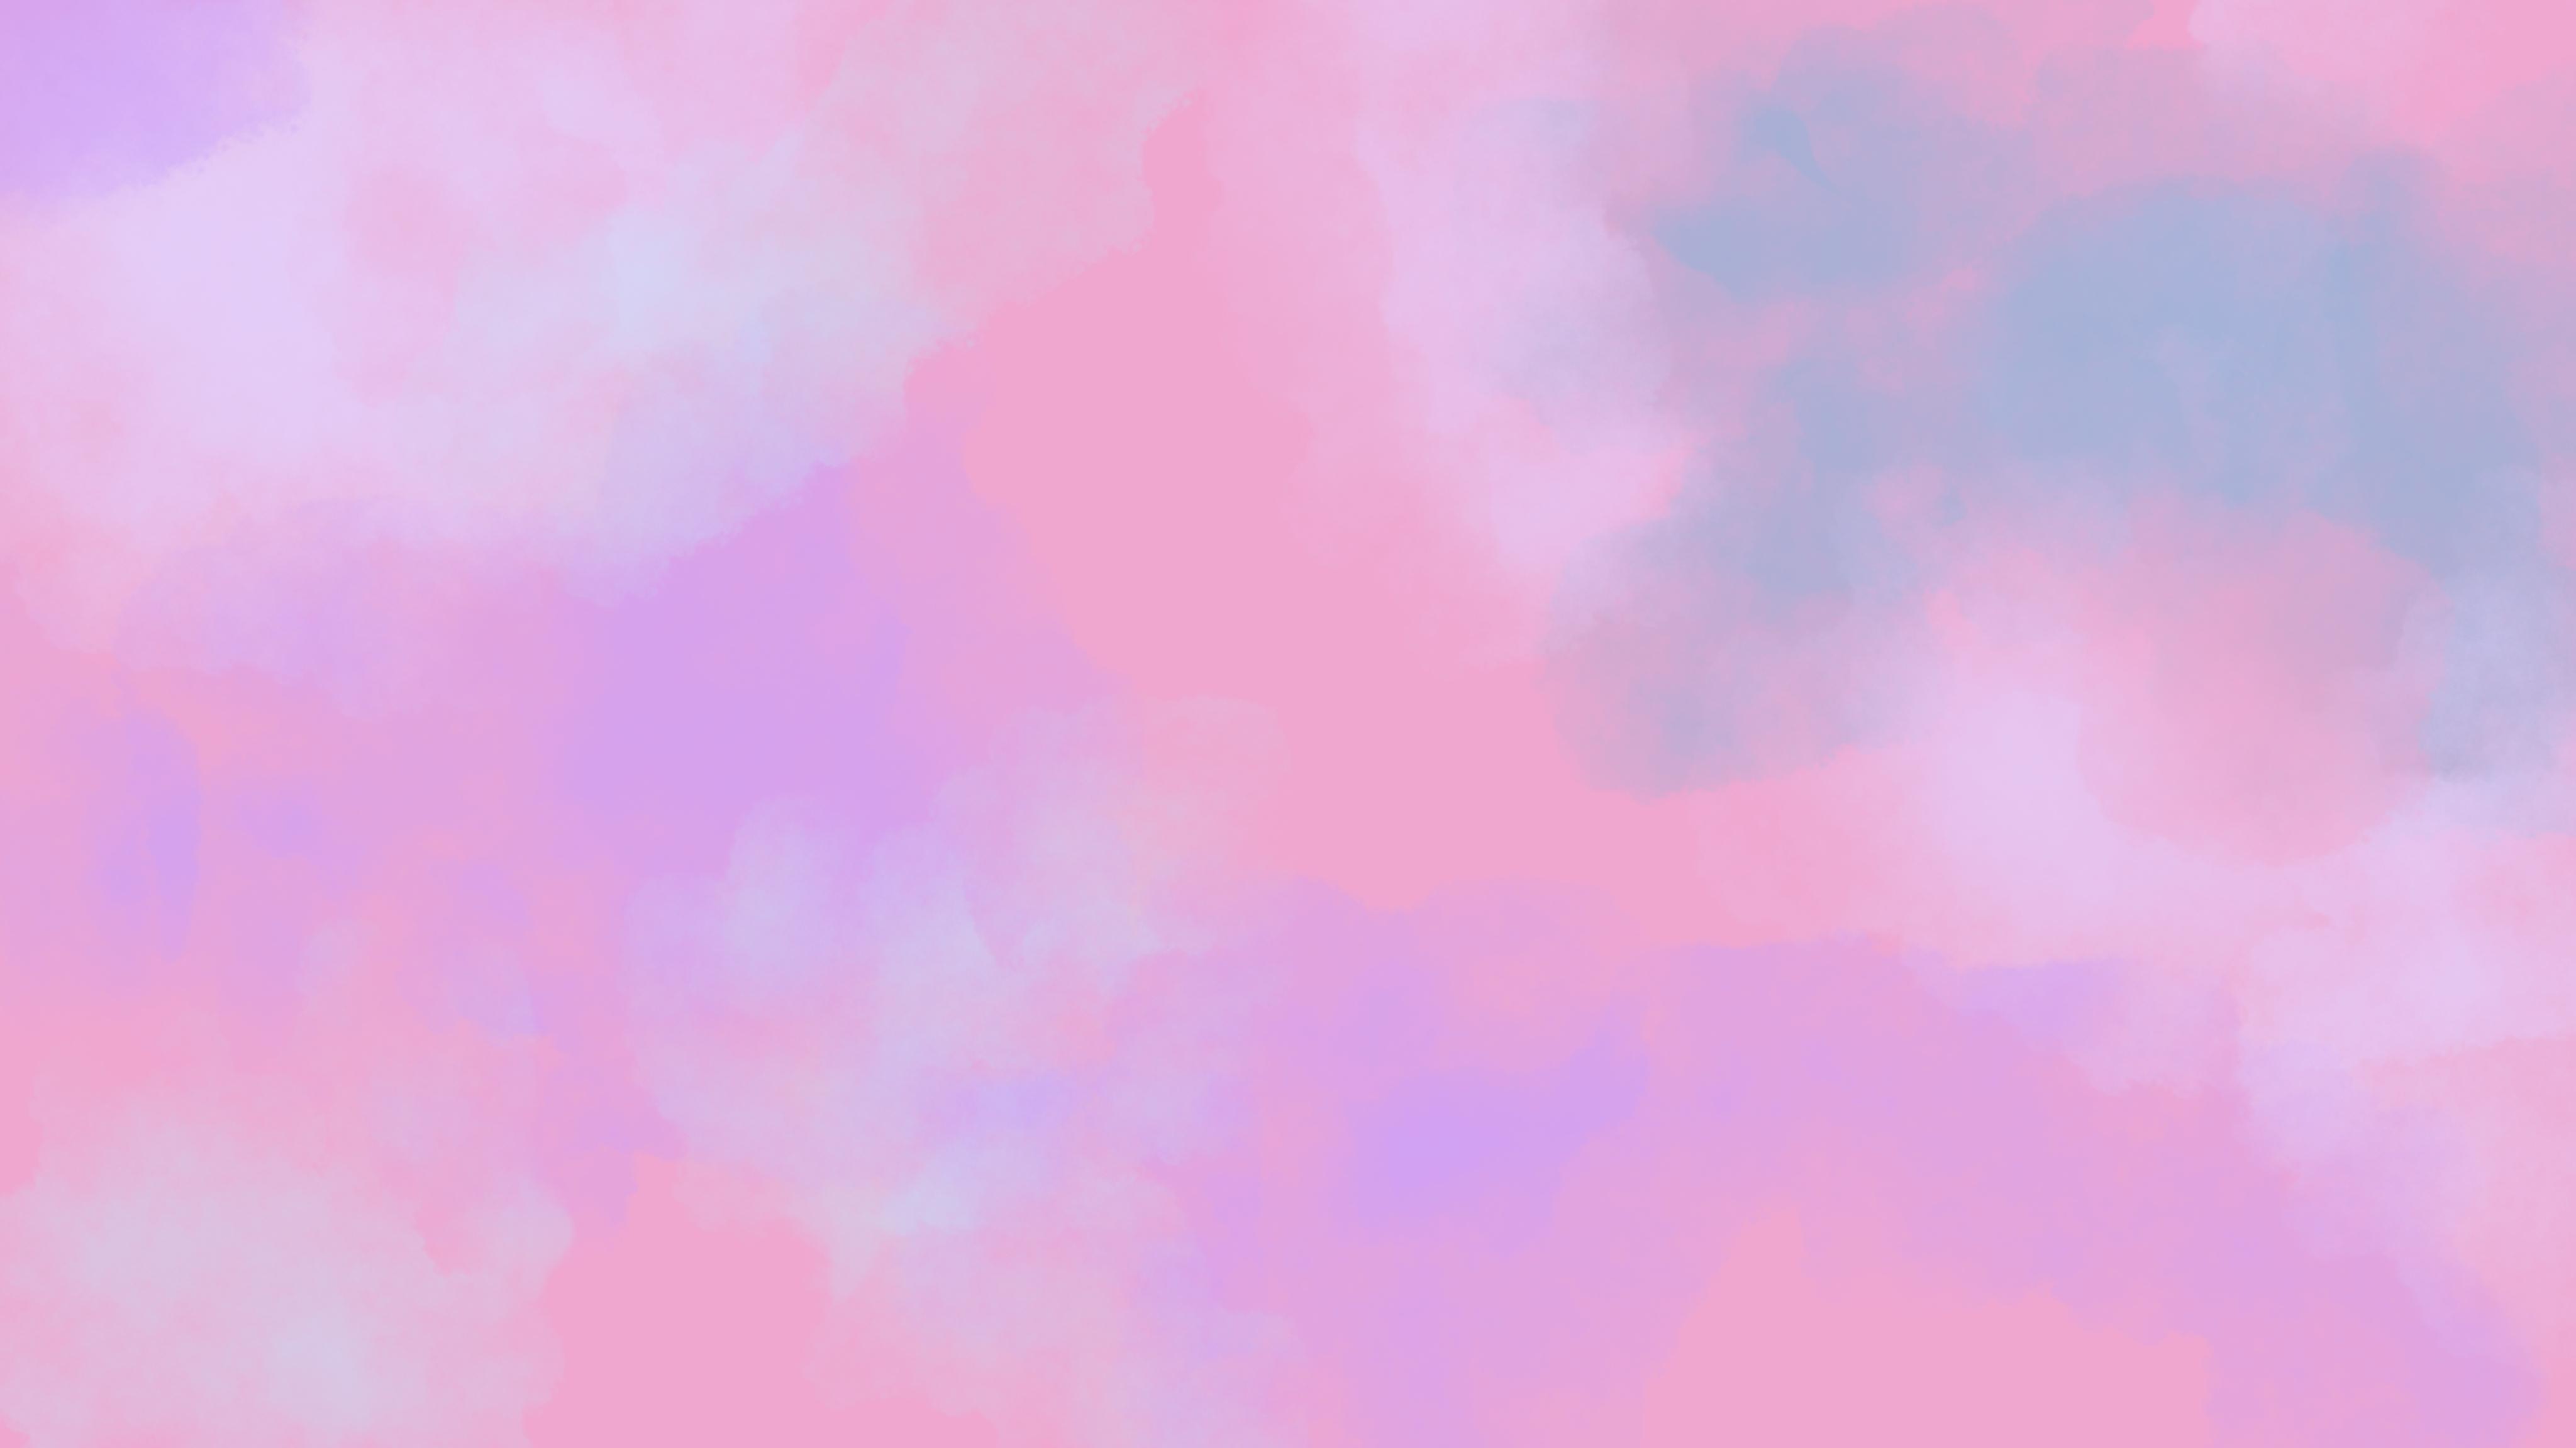 4k Wallpaper Cloudy Tie Dye Pastel Pink By Lex Official On